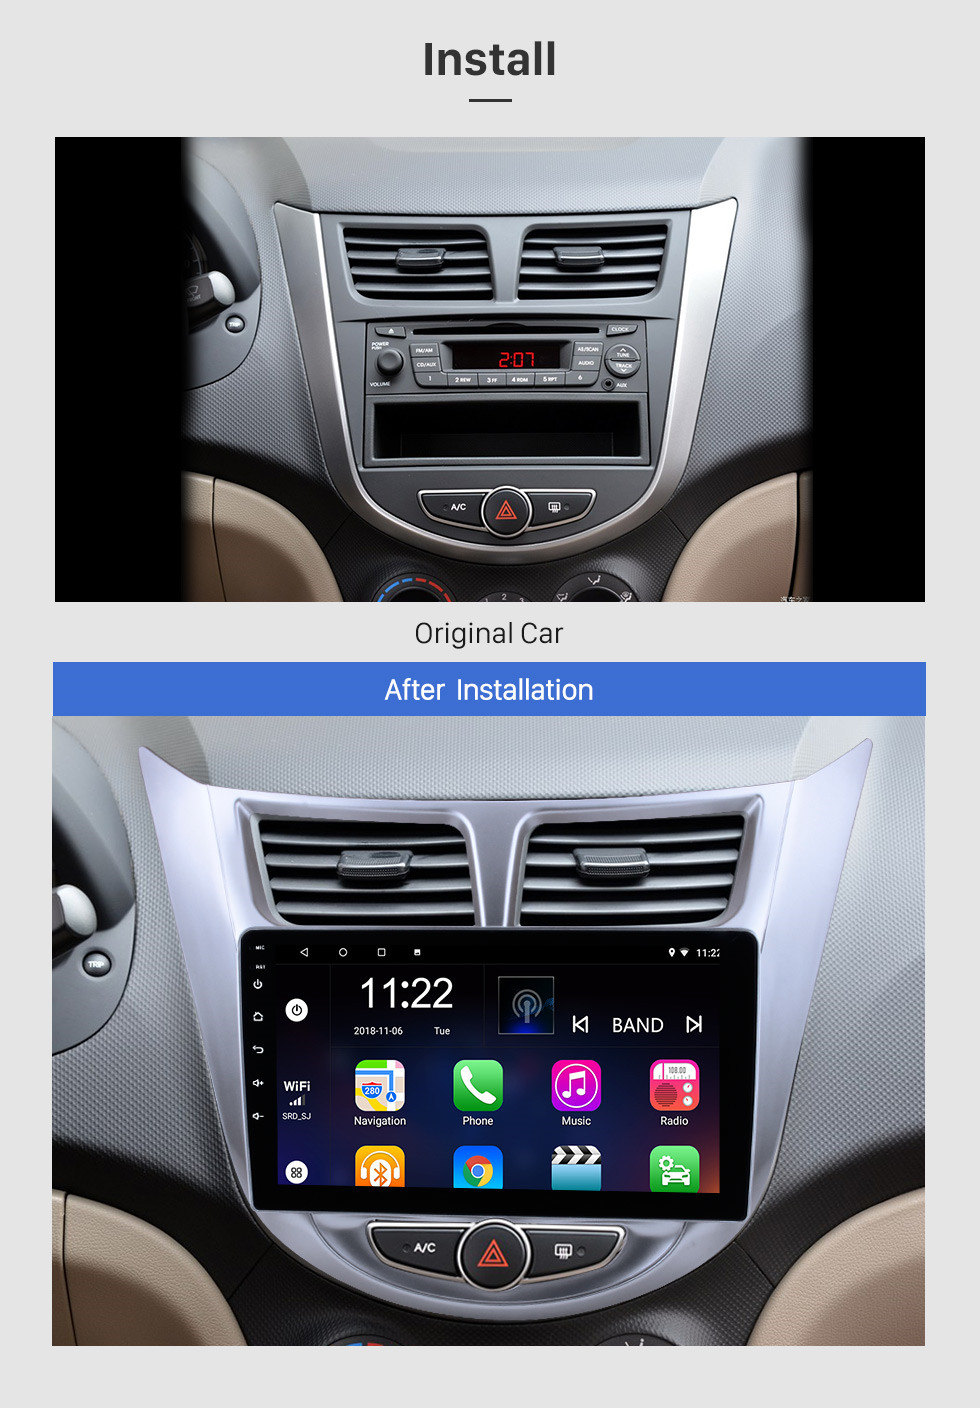 Seicane 9 Zoll HD 1024 * 600 Android 13.0 2011 2012 2013 Hyundai Verna Accent Solaris Radio Upgrade GPS-Navigation Aftermarket Auto Stereo Multitouch Kapazitiver Bildschirm Bluetooth Musik 3G WiFi Spiegel Link OBD2 MP3 MP4